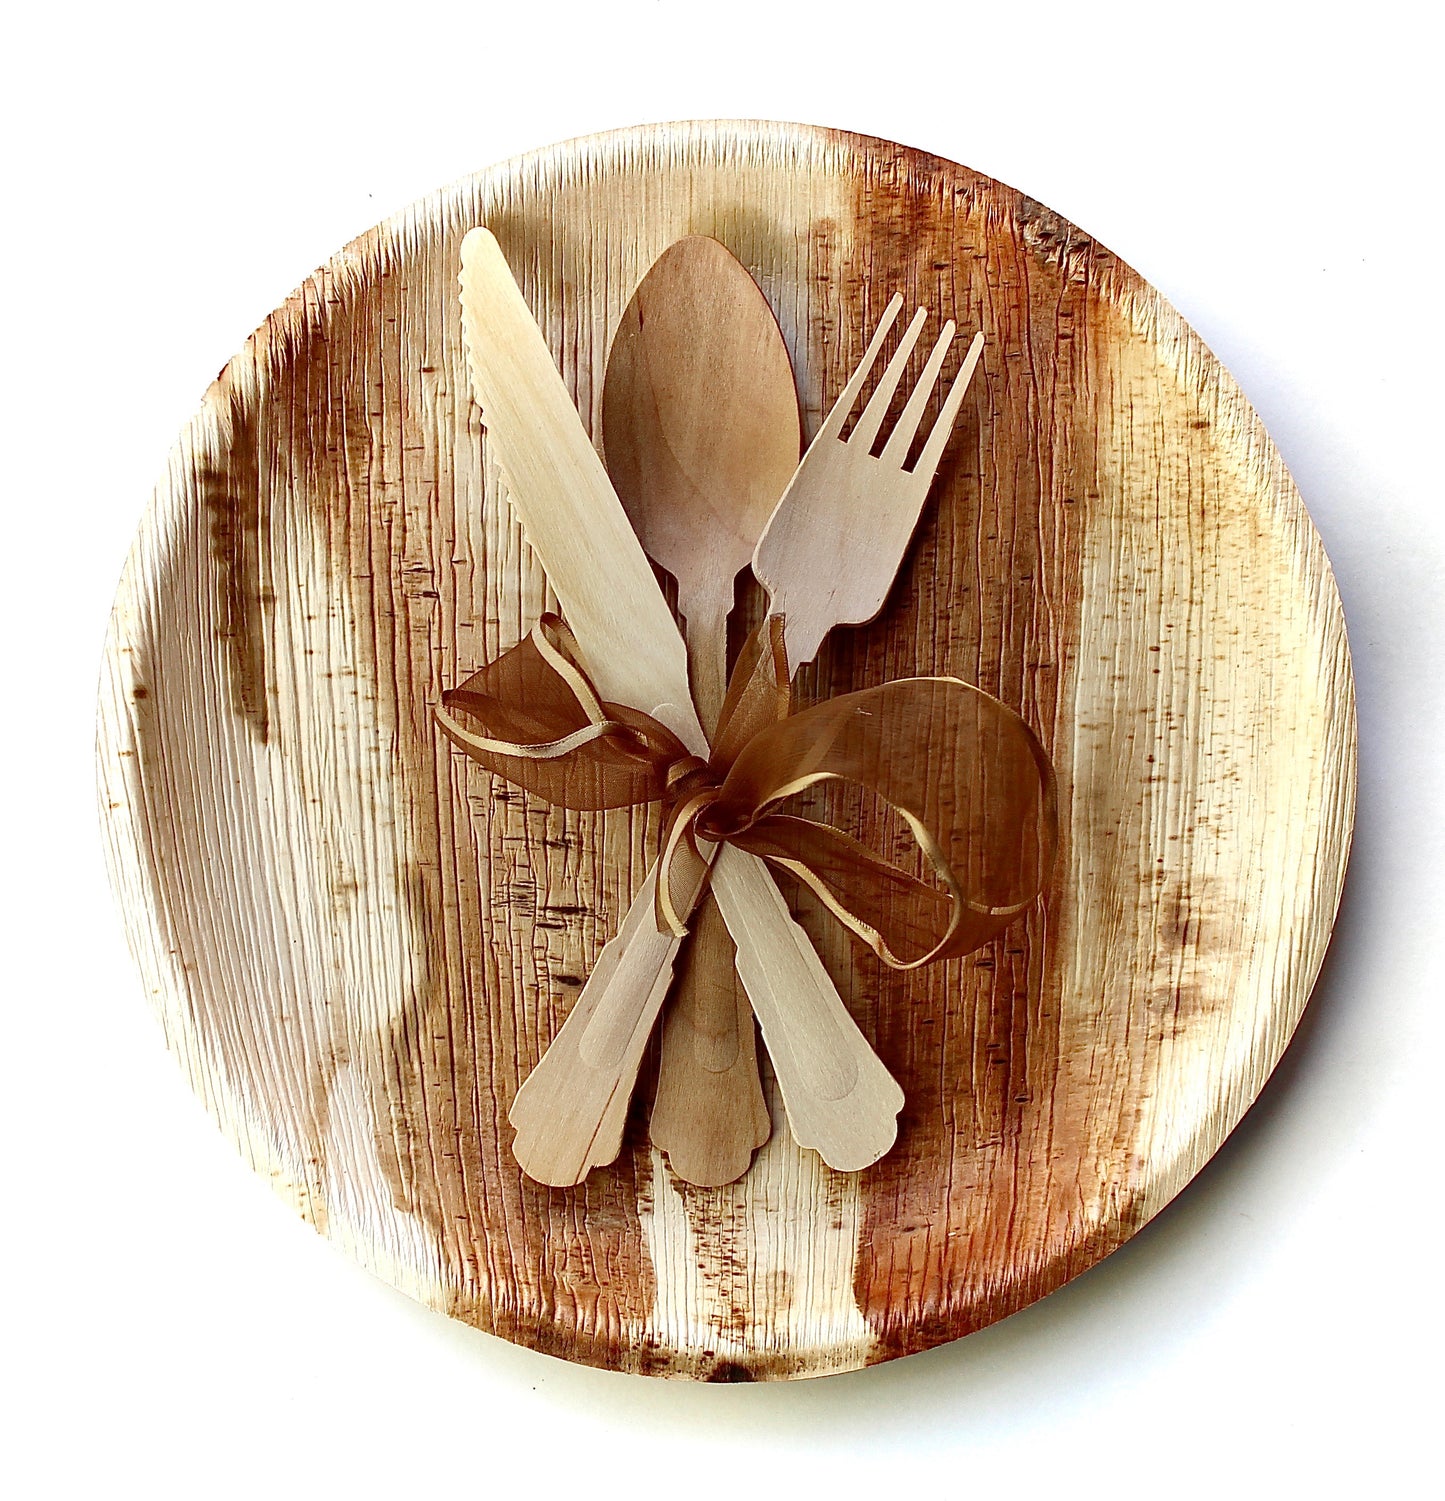 Palm leaf plate 25 pices 10" Round  plates ane 75 pices cutlery compostable and Biodegradable heavy Duty - event - party